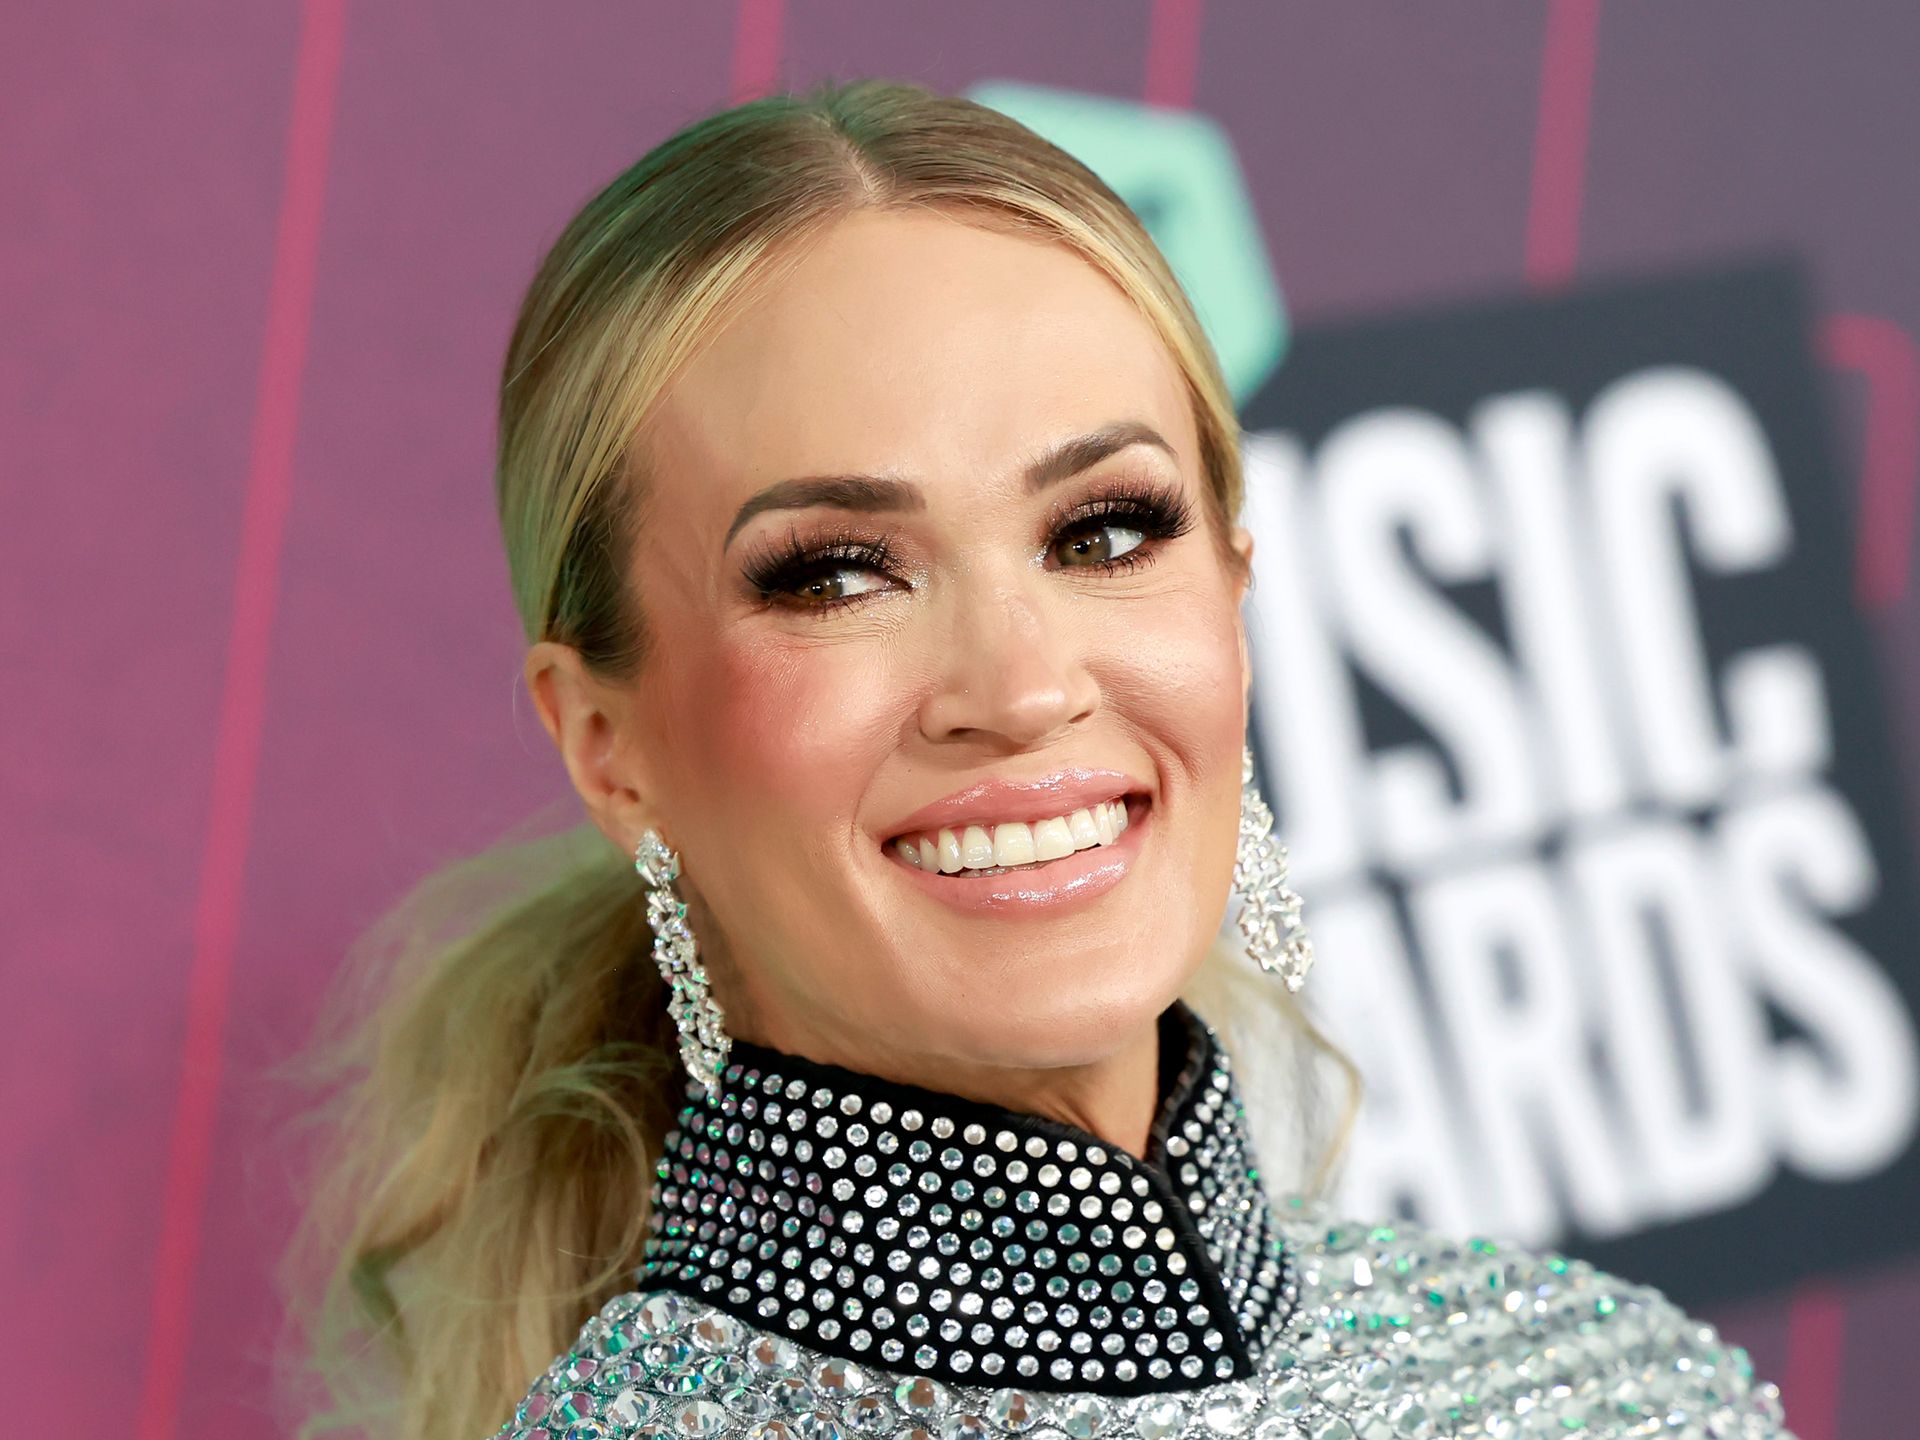 Carrie Underwood Shut Down the Stage in Sequins Chaps